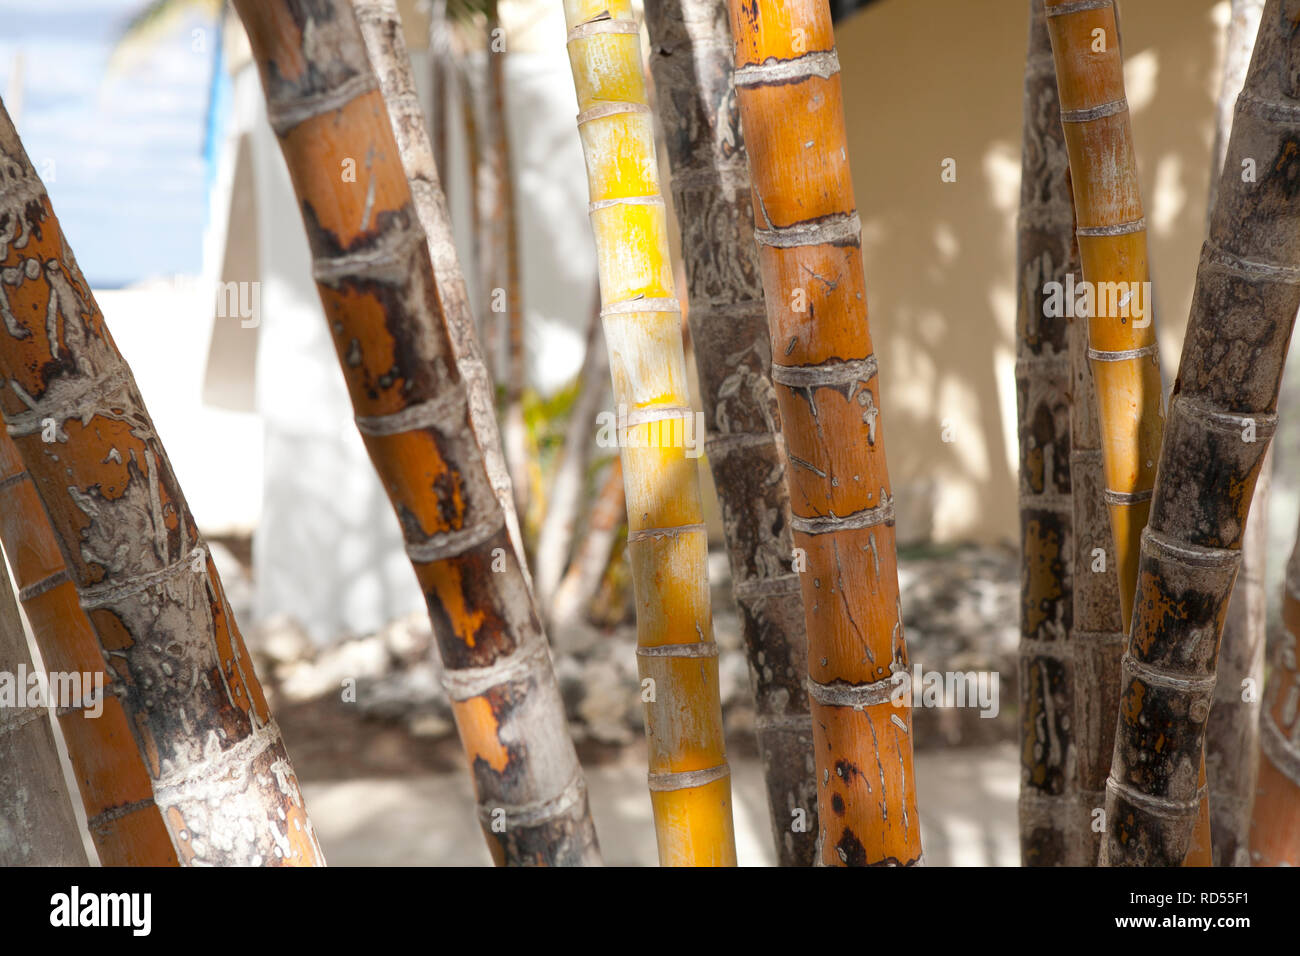 Abstract close ups of palm trees with interesting natural shades of green yellow and orange Stock Photo